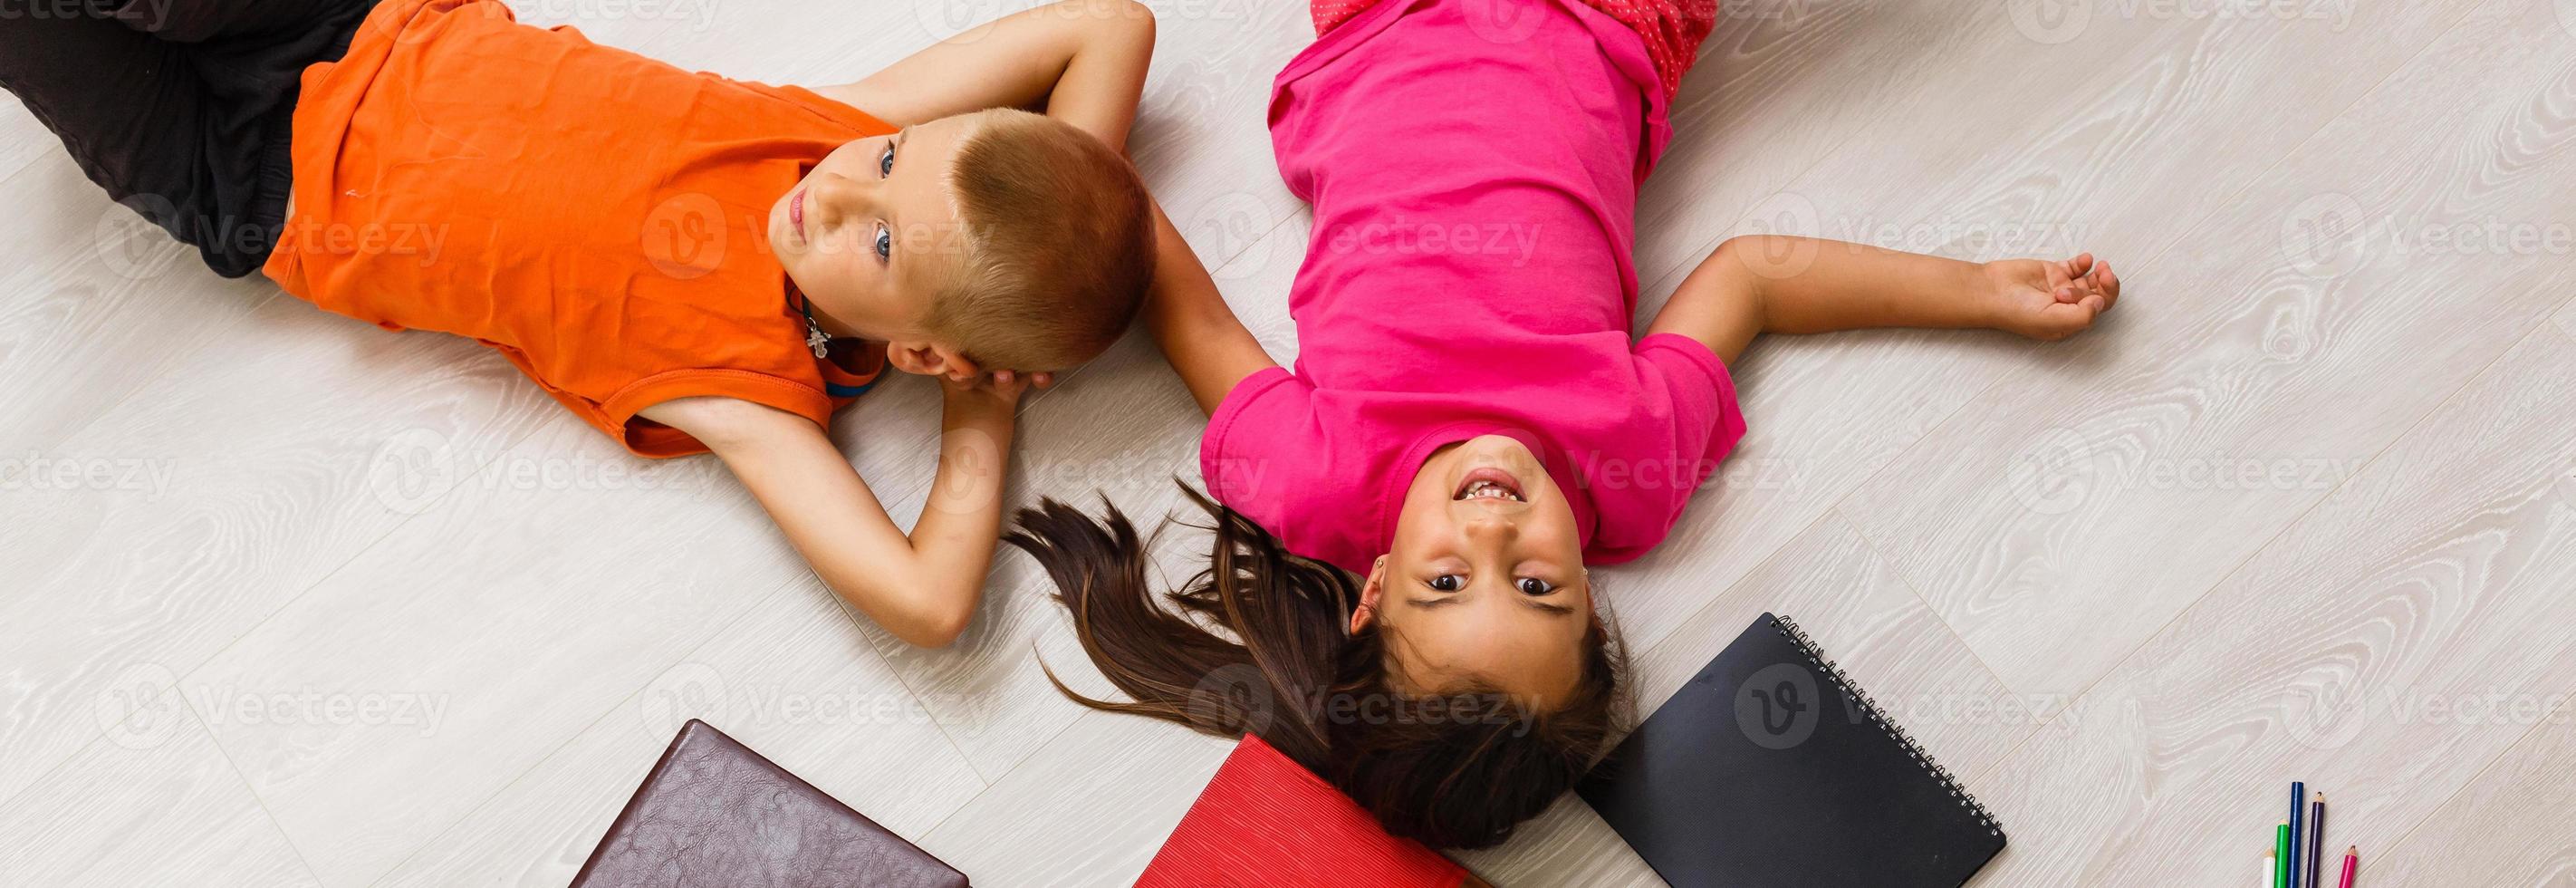 Kids reading for school lying on floor at home photo